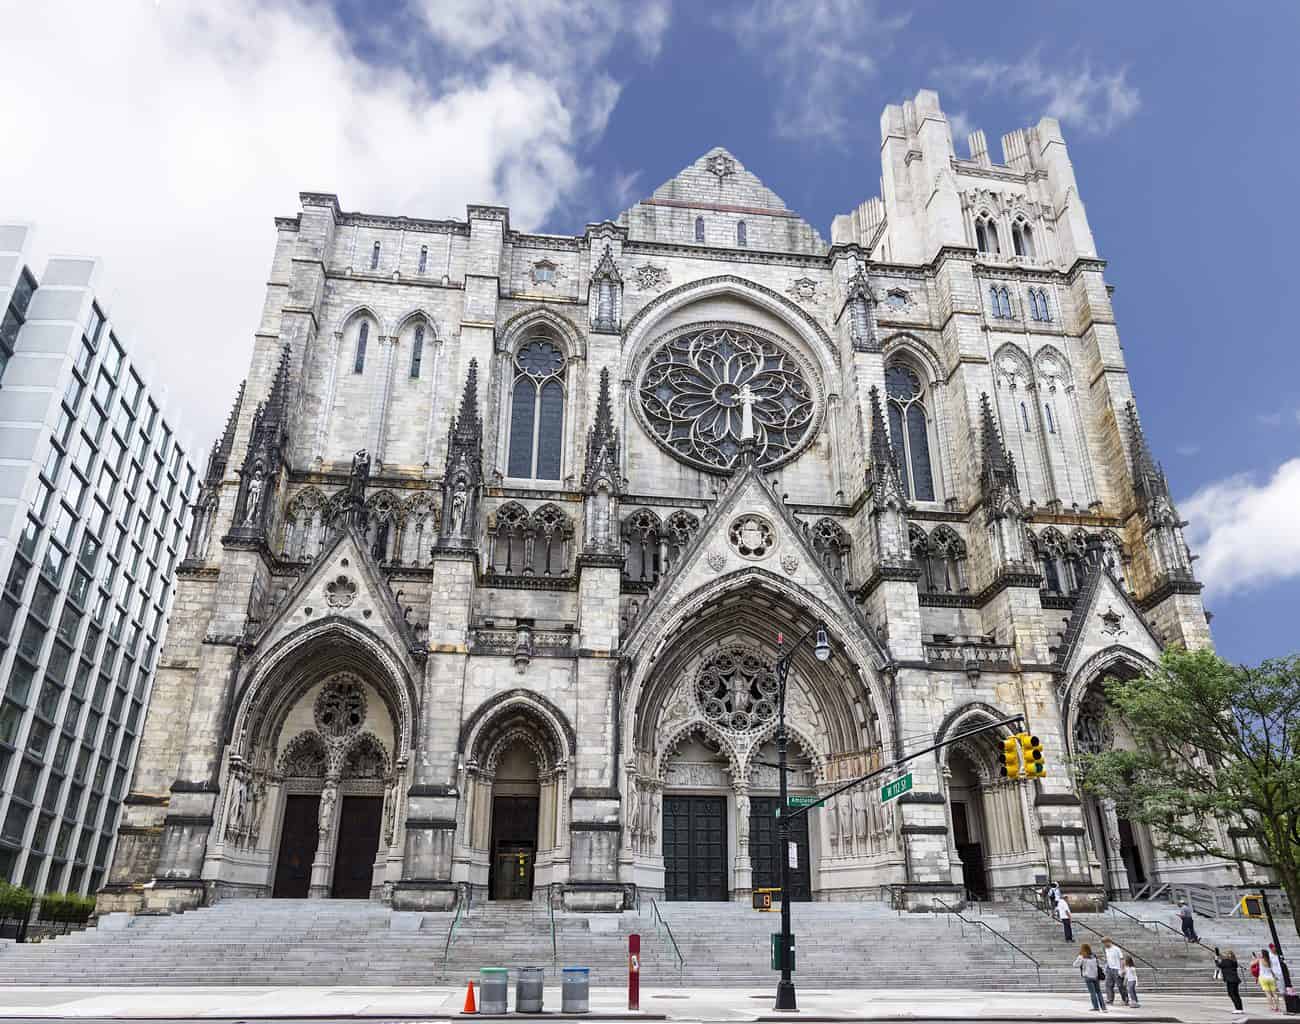 Exteriro of St. John the Divine, a stunning Episcopal Church in NYC. 